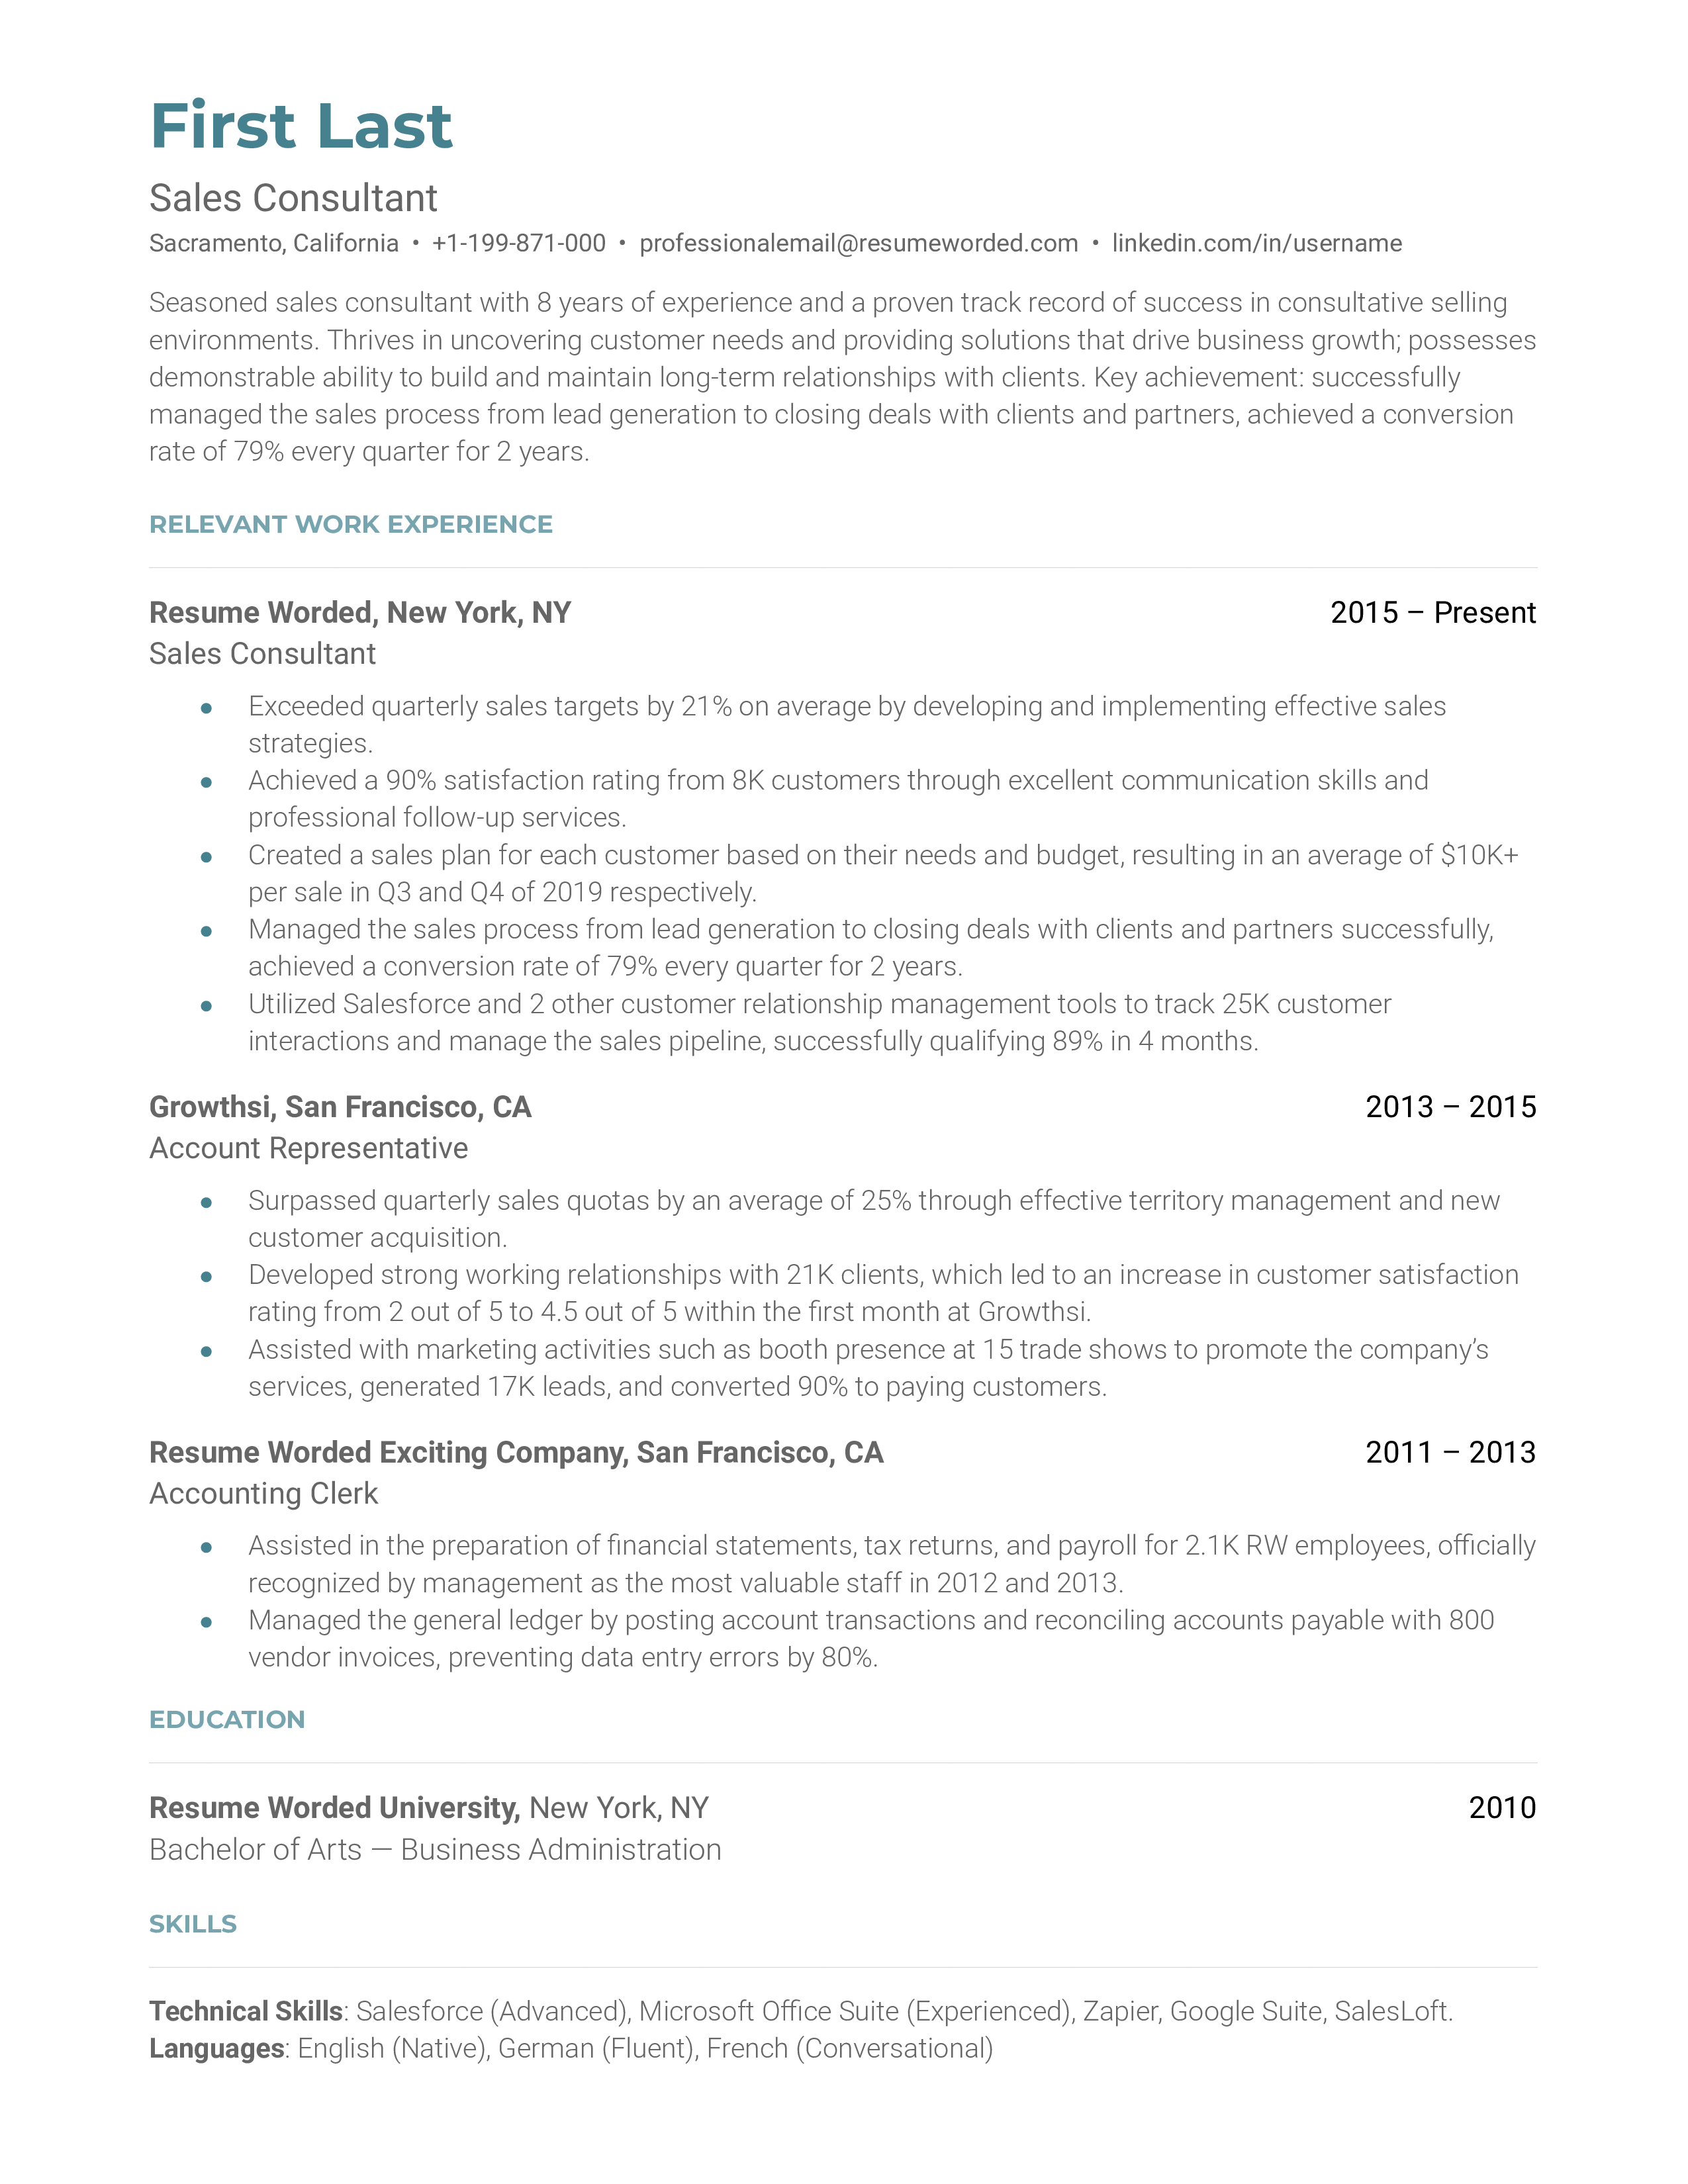 A sales consultant resume template that includes a description and relevant work experience. 